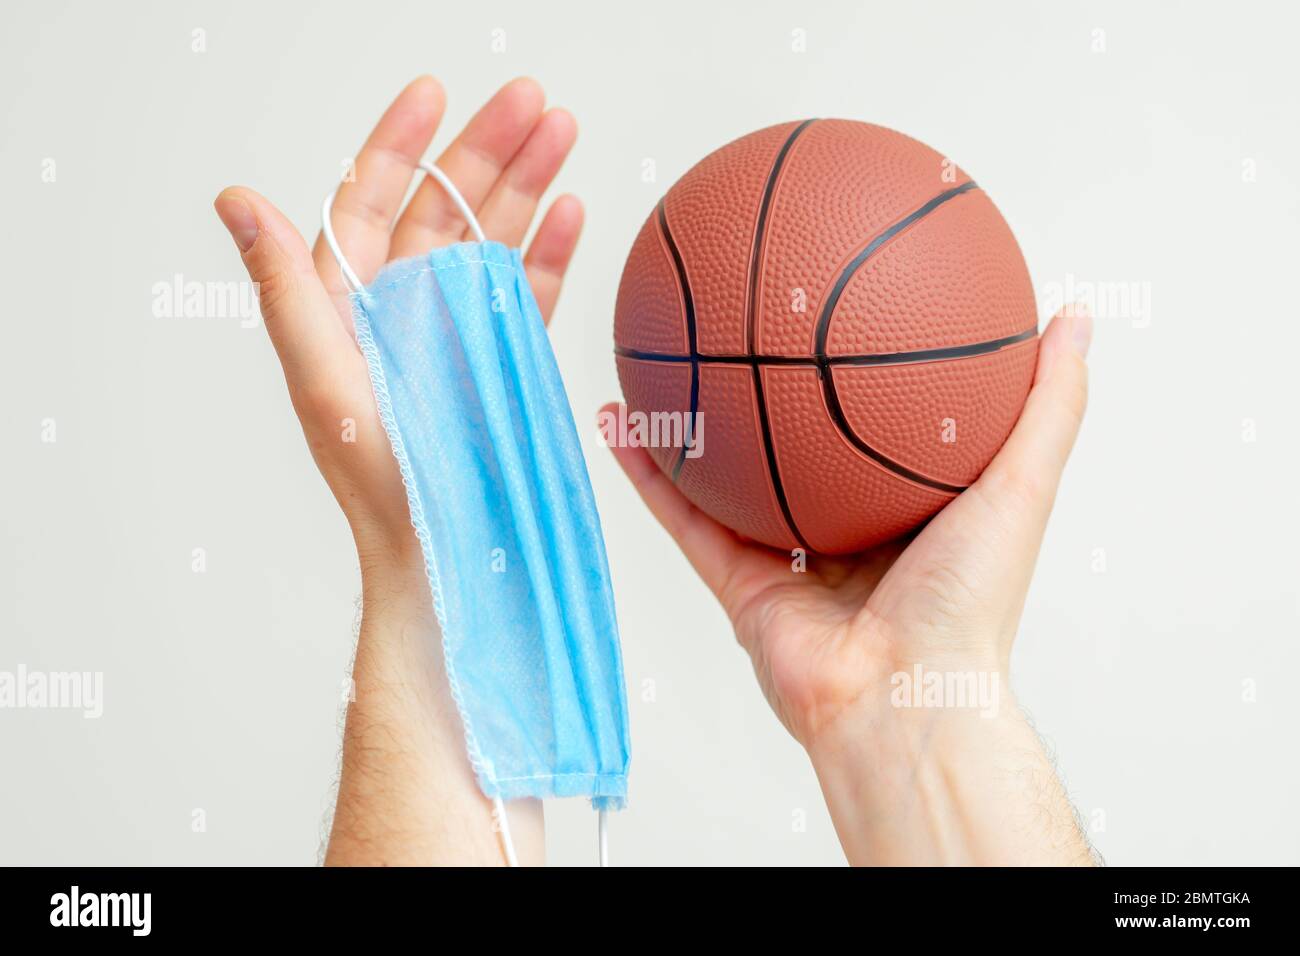 Closeup of basketball ball with a medical mask in man's hands on a light background. Cancellation of sporting events. Stock Photo